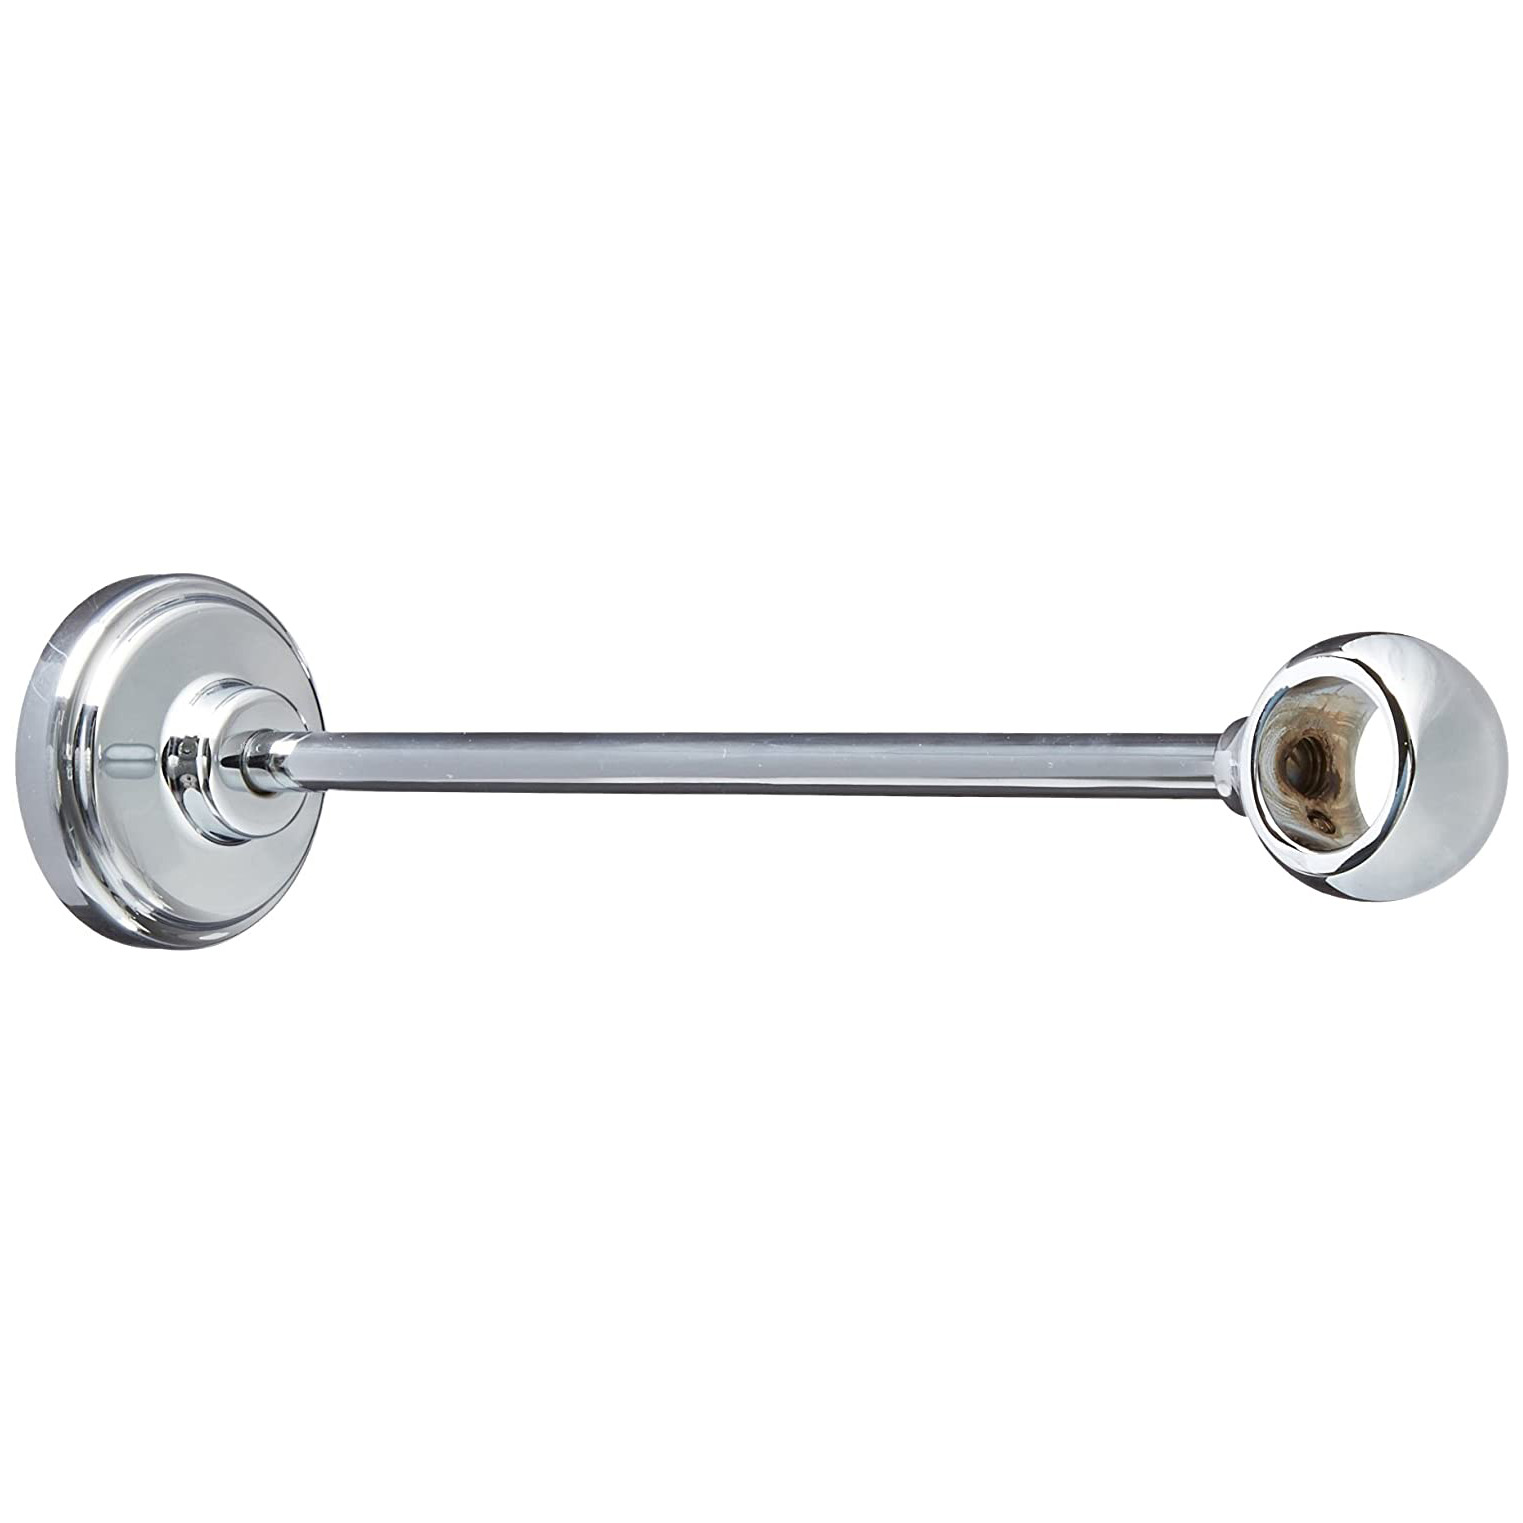 Perrin & Rowe Support Stanchion 8" for Exposed Risers Polished Chrome